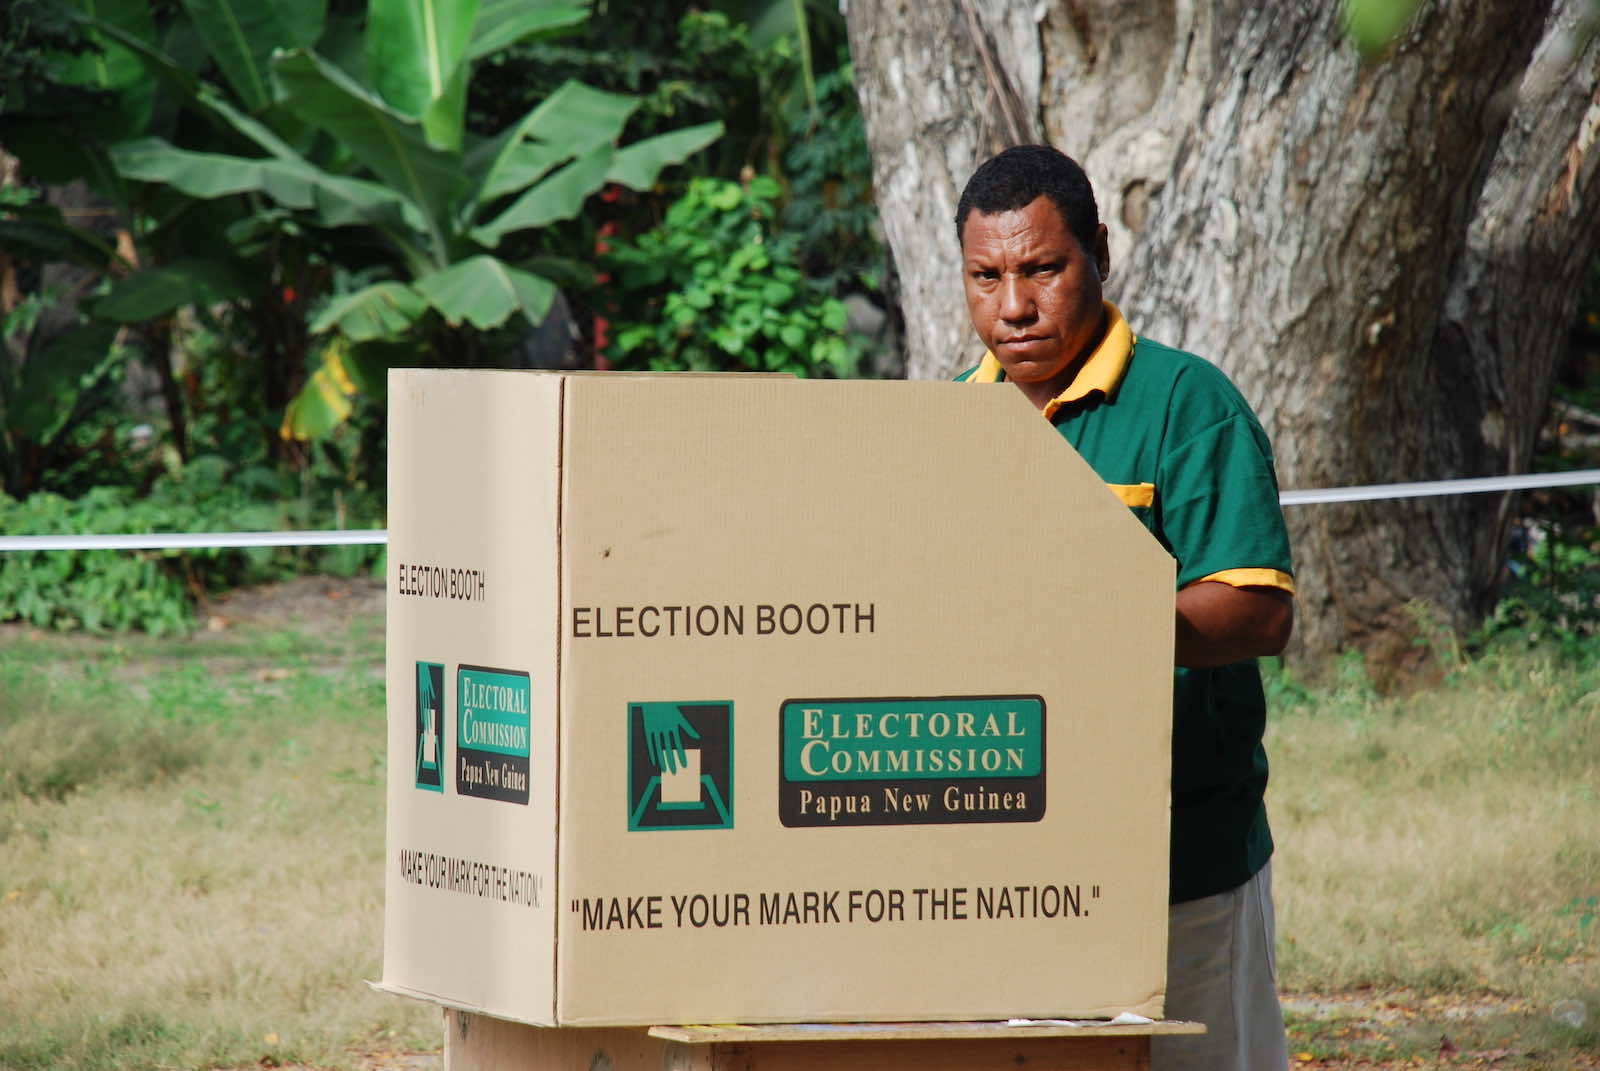 Parochial issues tend to occupied people’s mind in the voting booth (Commonwealth/Flickr)